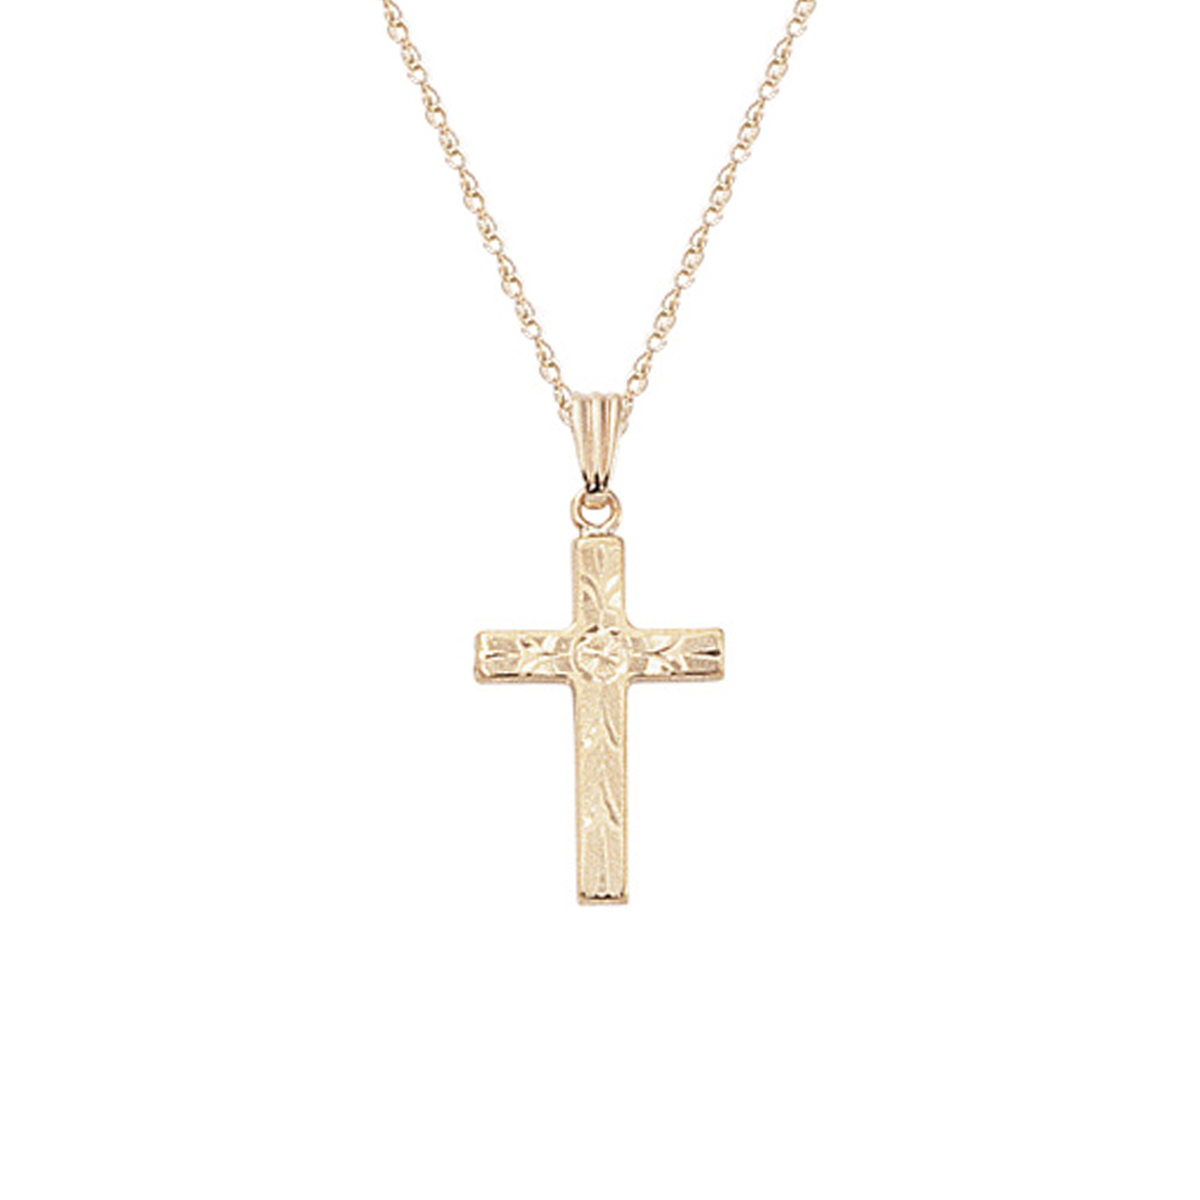 14K Yellow Gold Engraved Cross Pendant with Chain